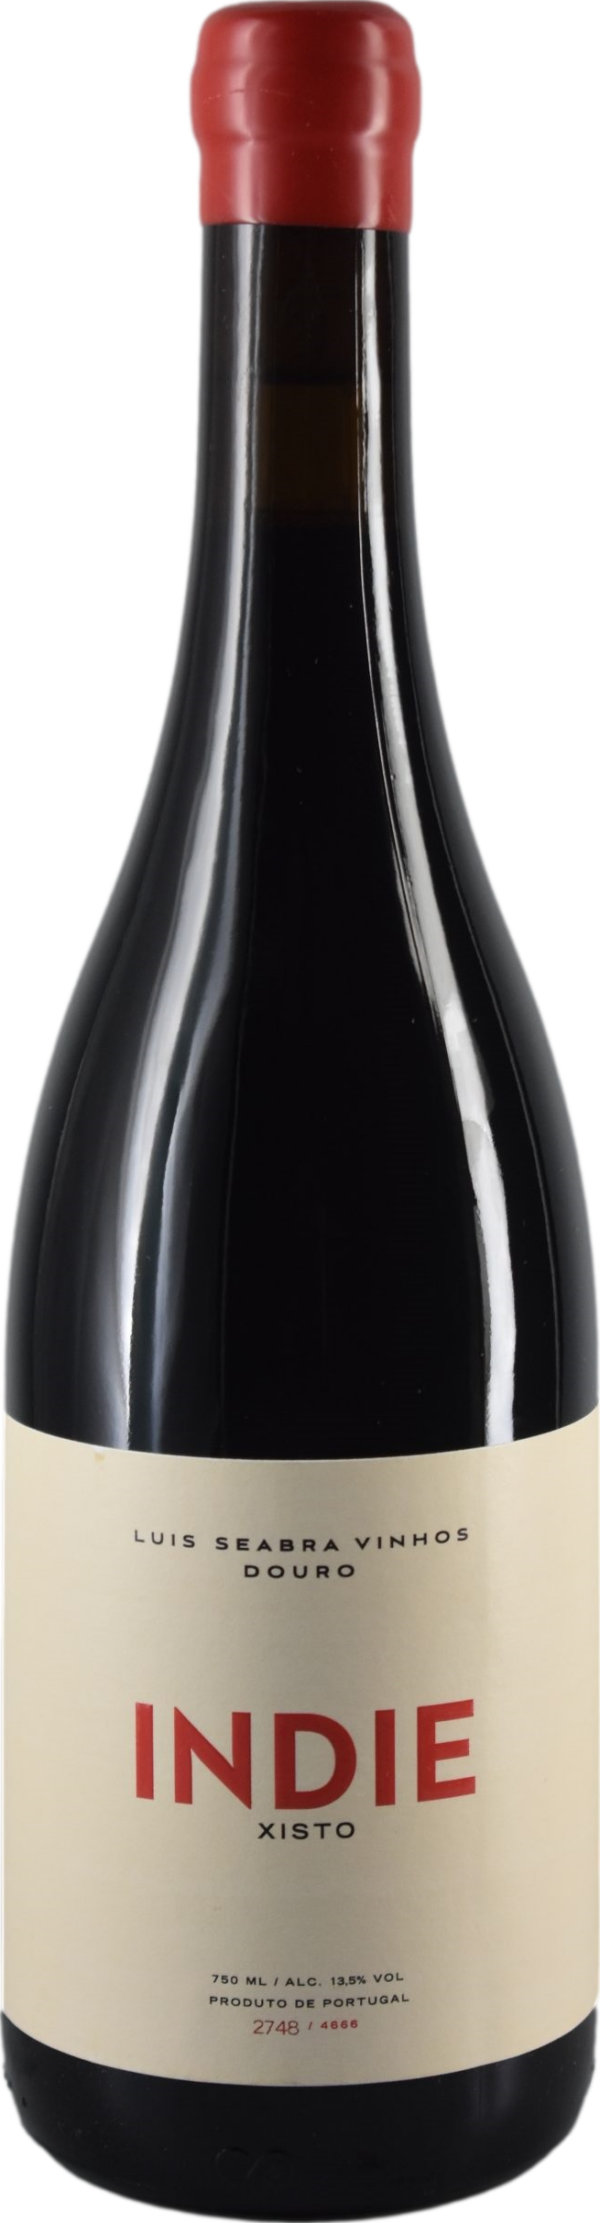 Product image of Luis Seabra Indie Xisto Tinto 2020 from 8wines